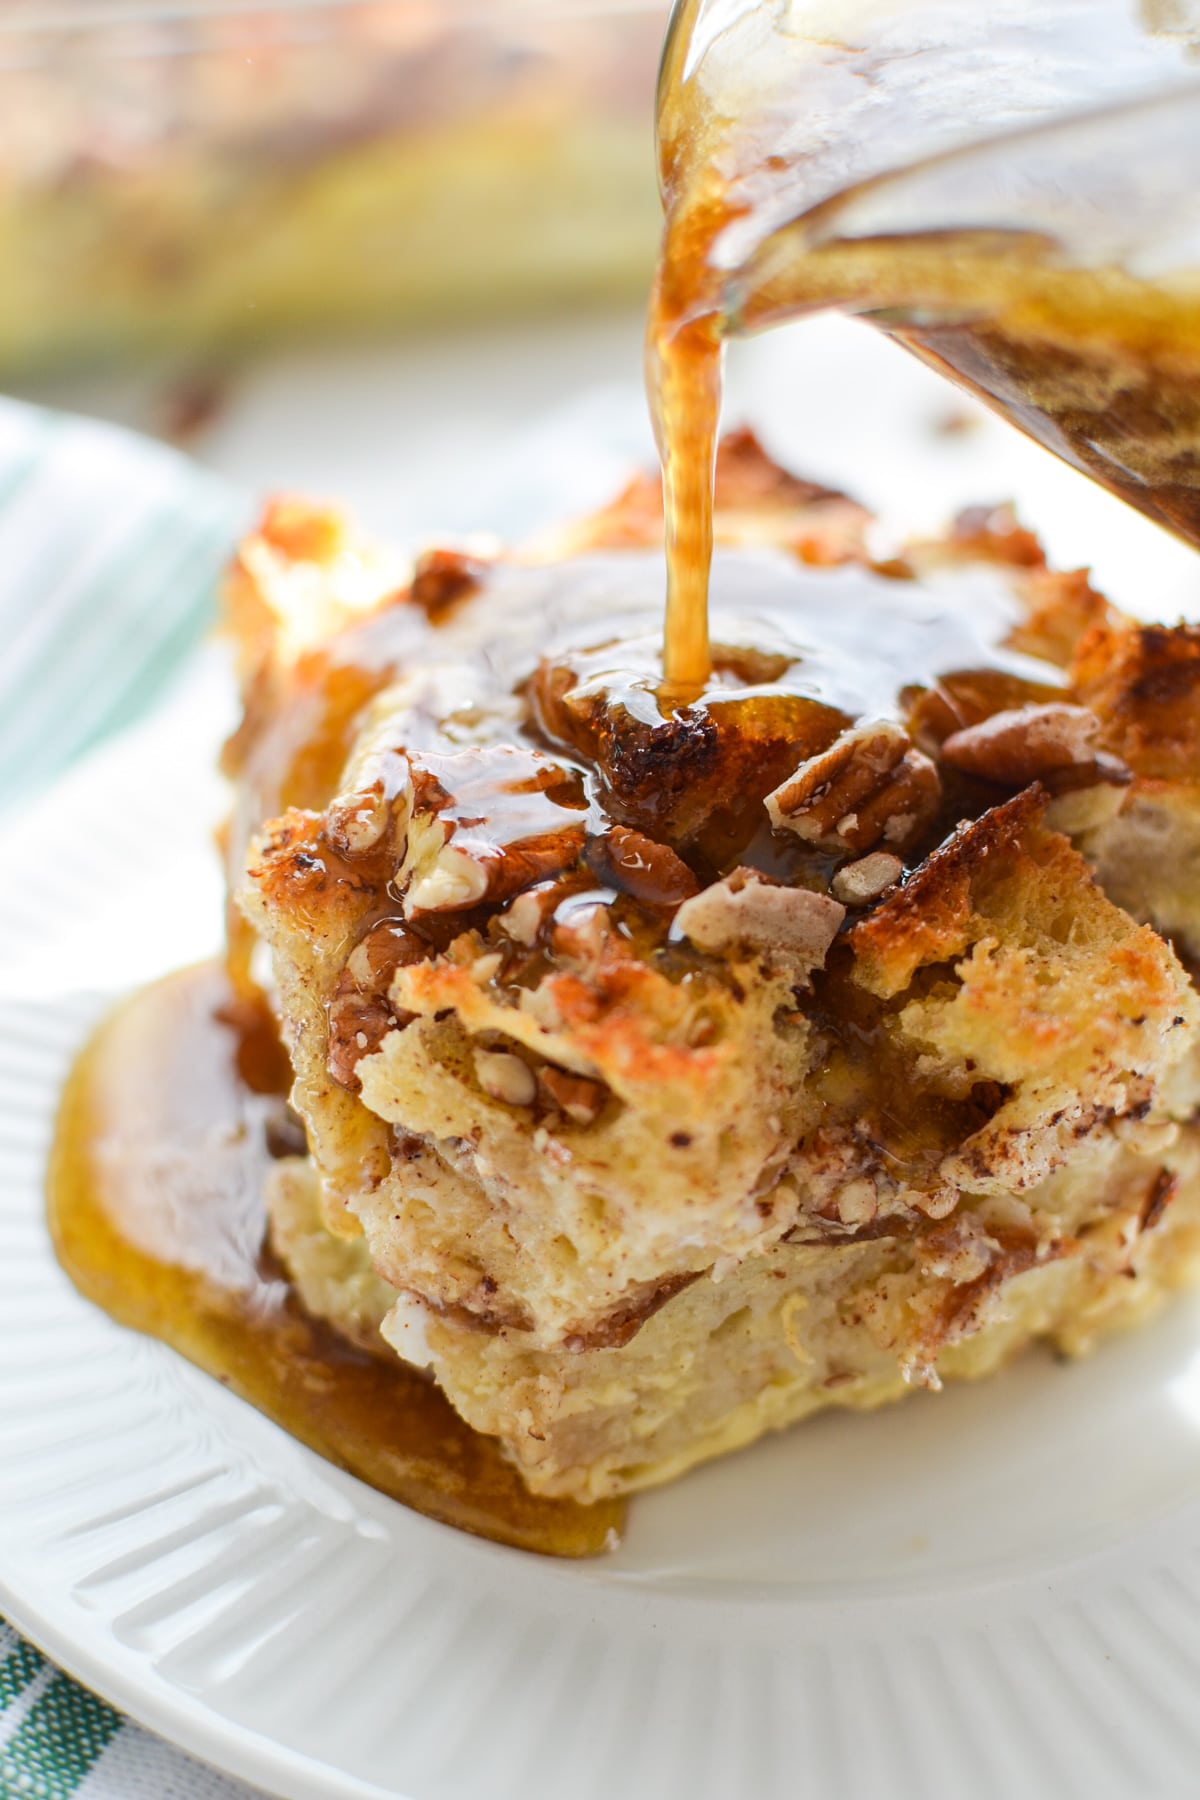 A large square of bread pudding, being drizzled with a brown sugar topping.